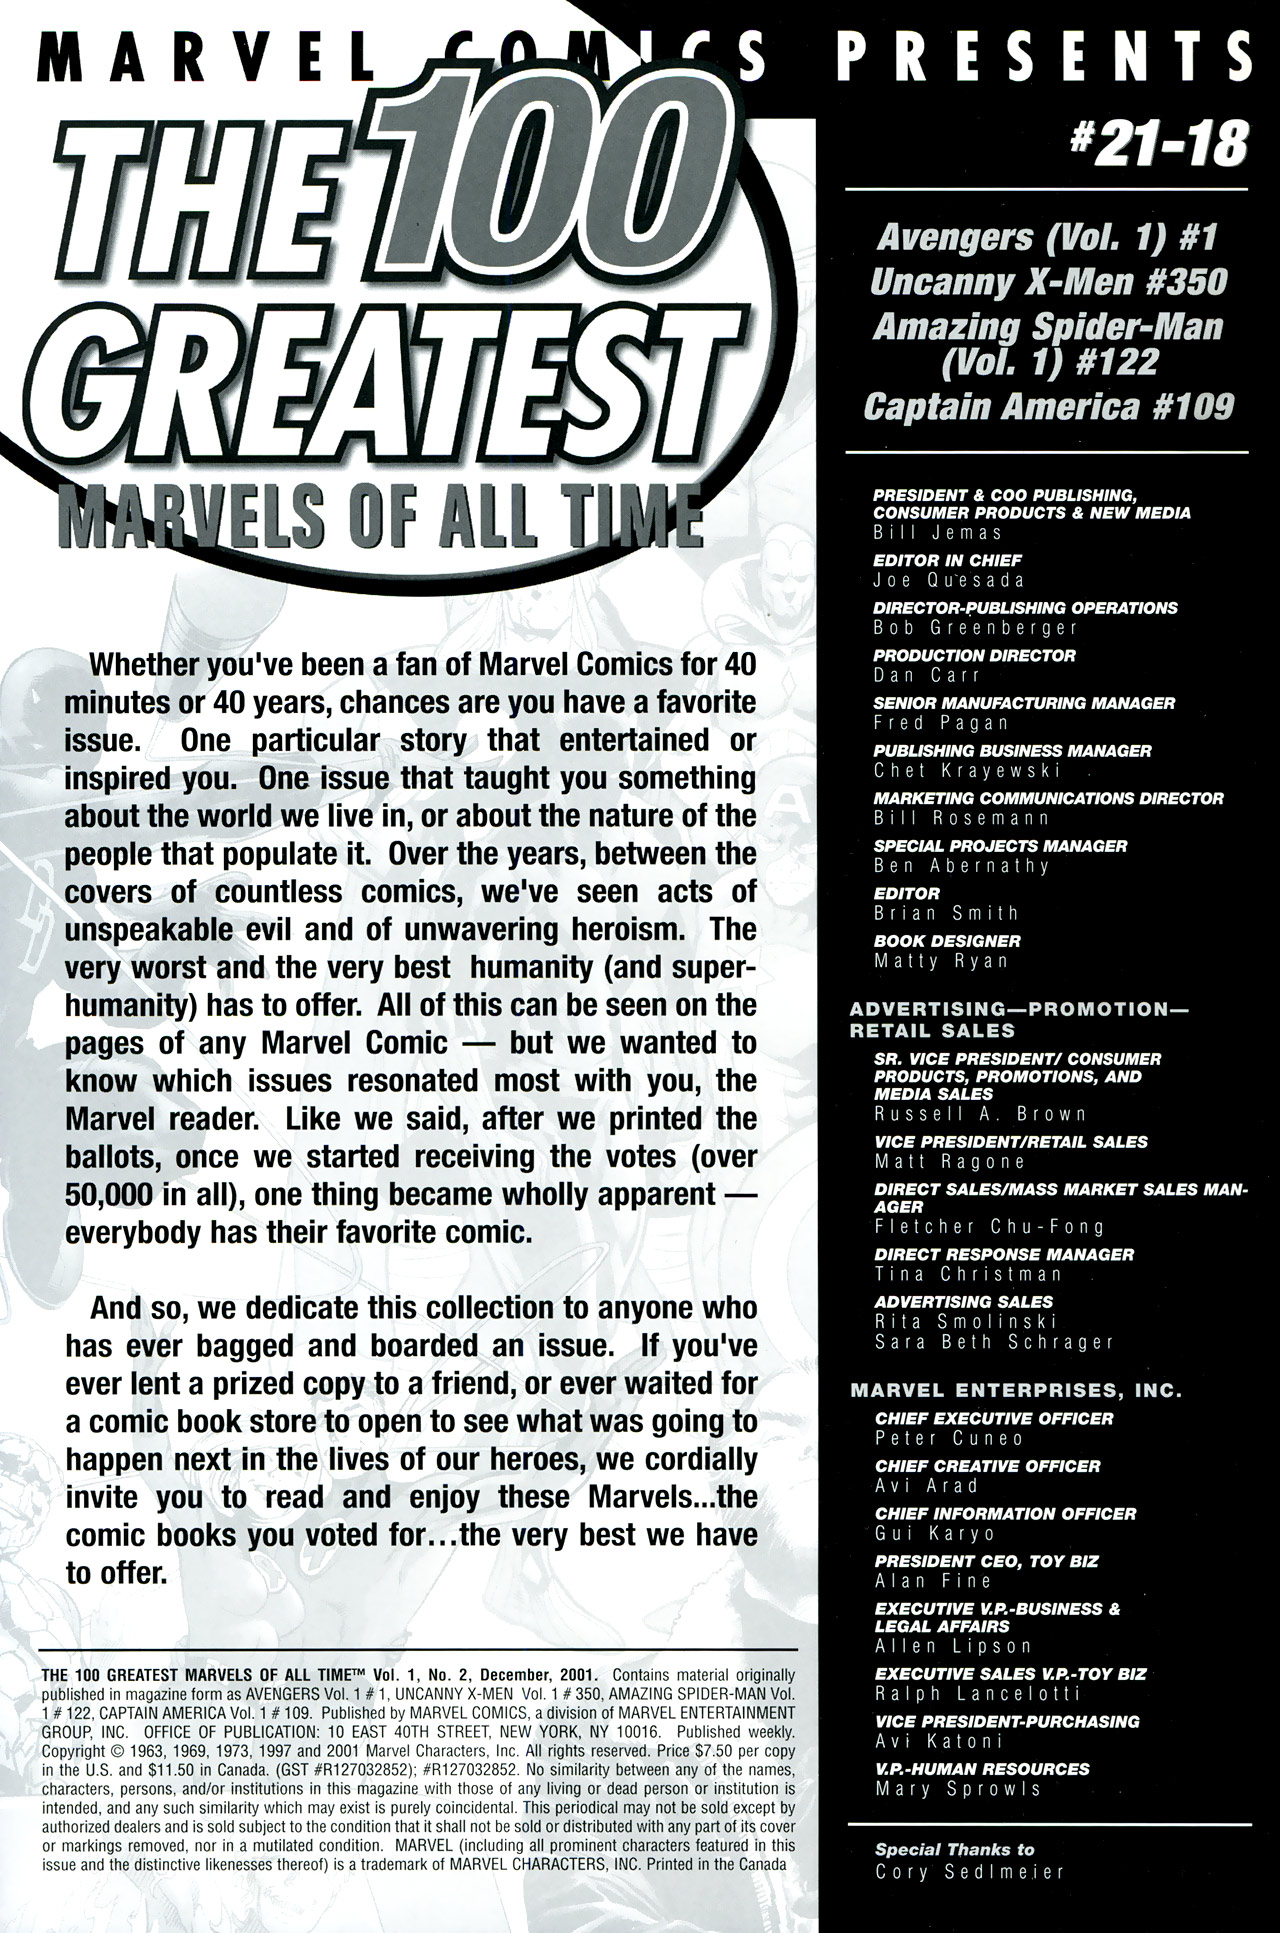 Read online The 100 Greatest Marvels of All Time comic -  Issue #2 - 2